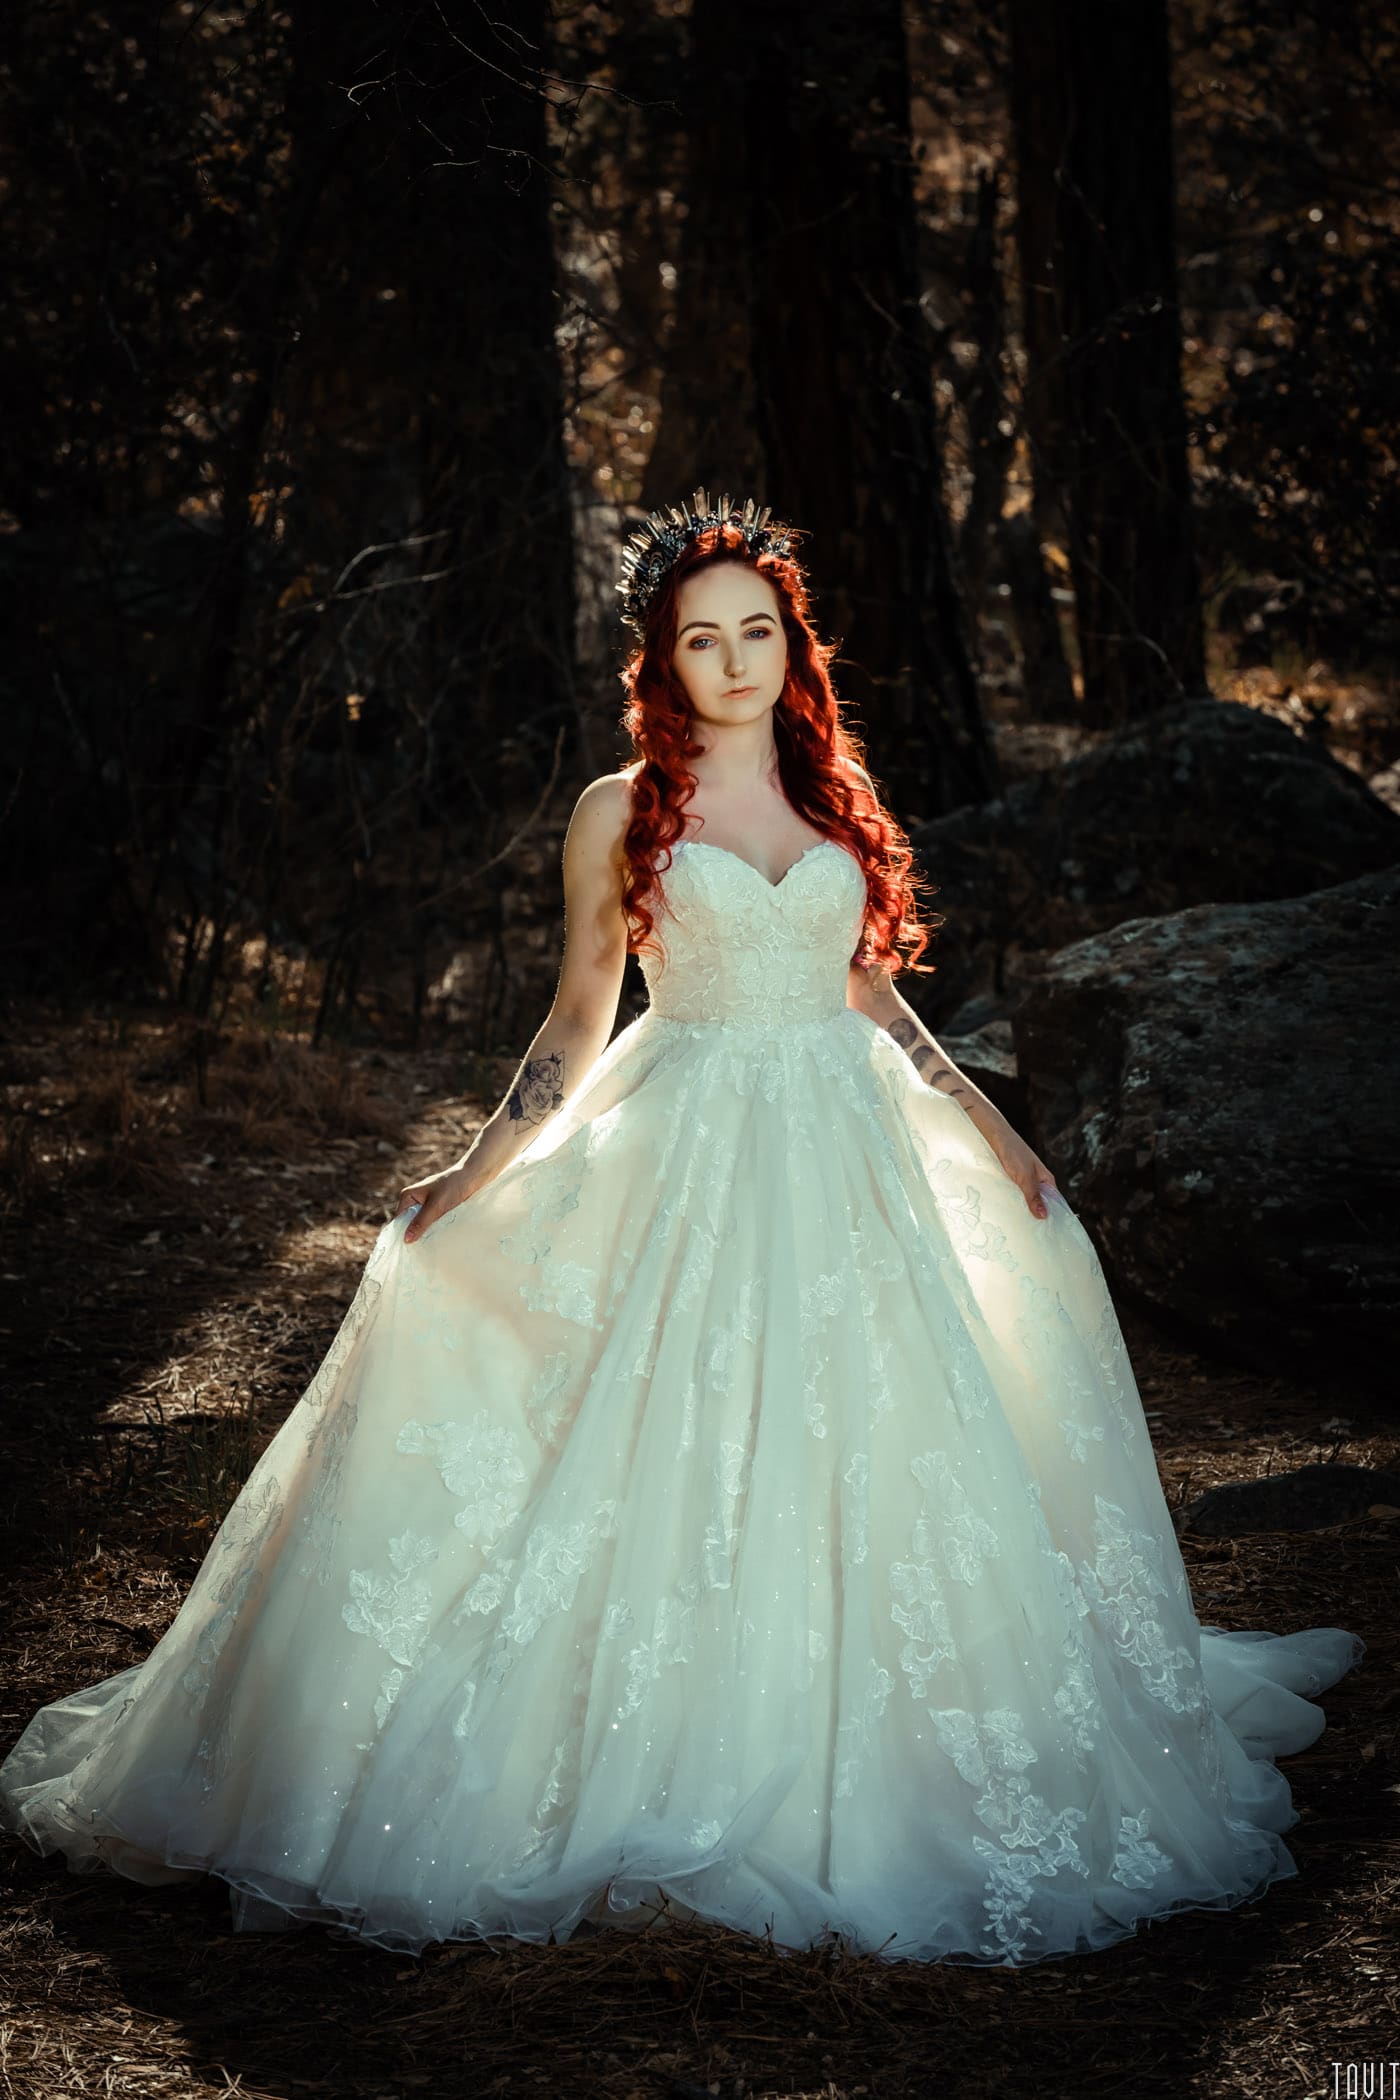 Bride holding dress in forest